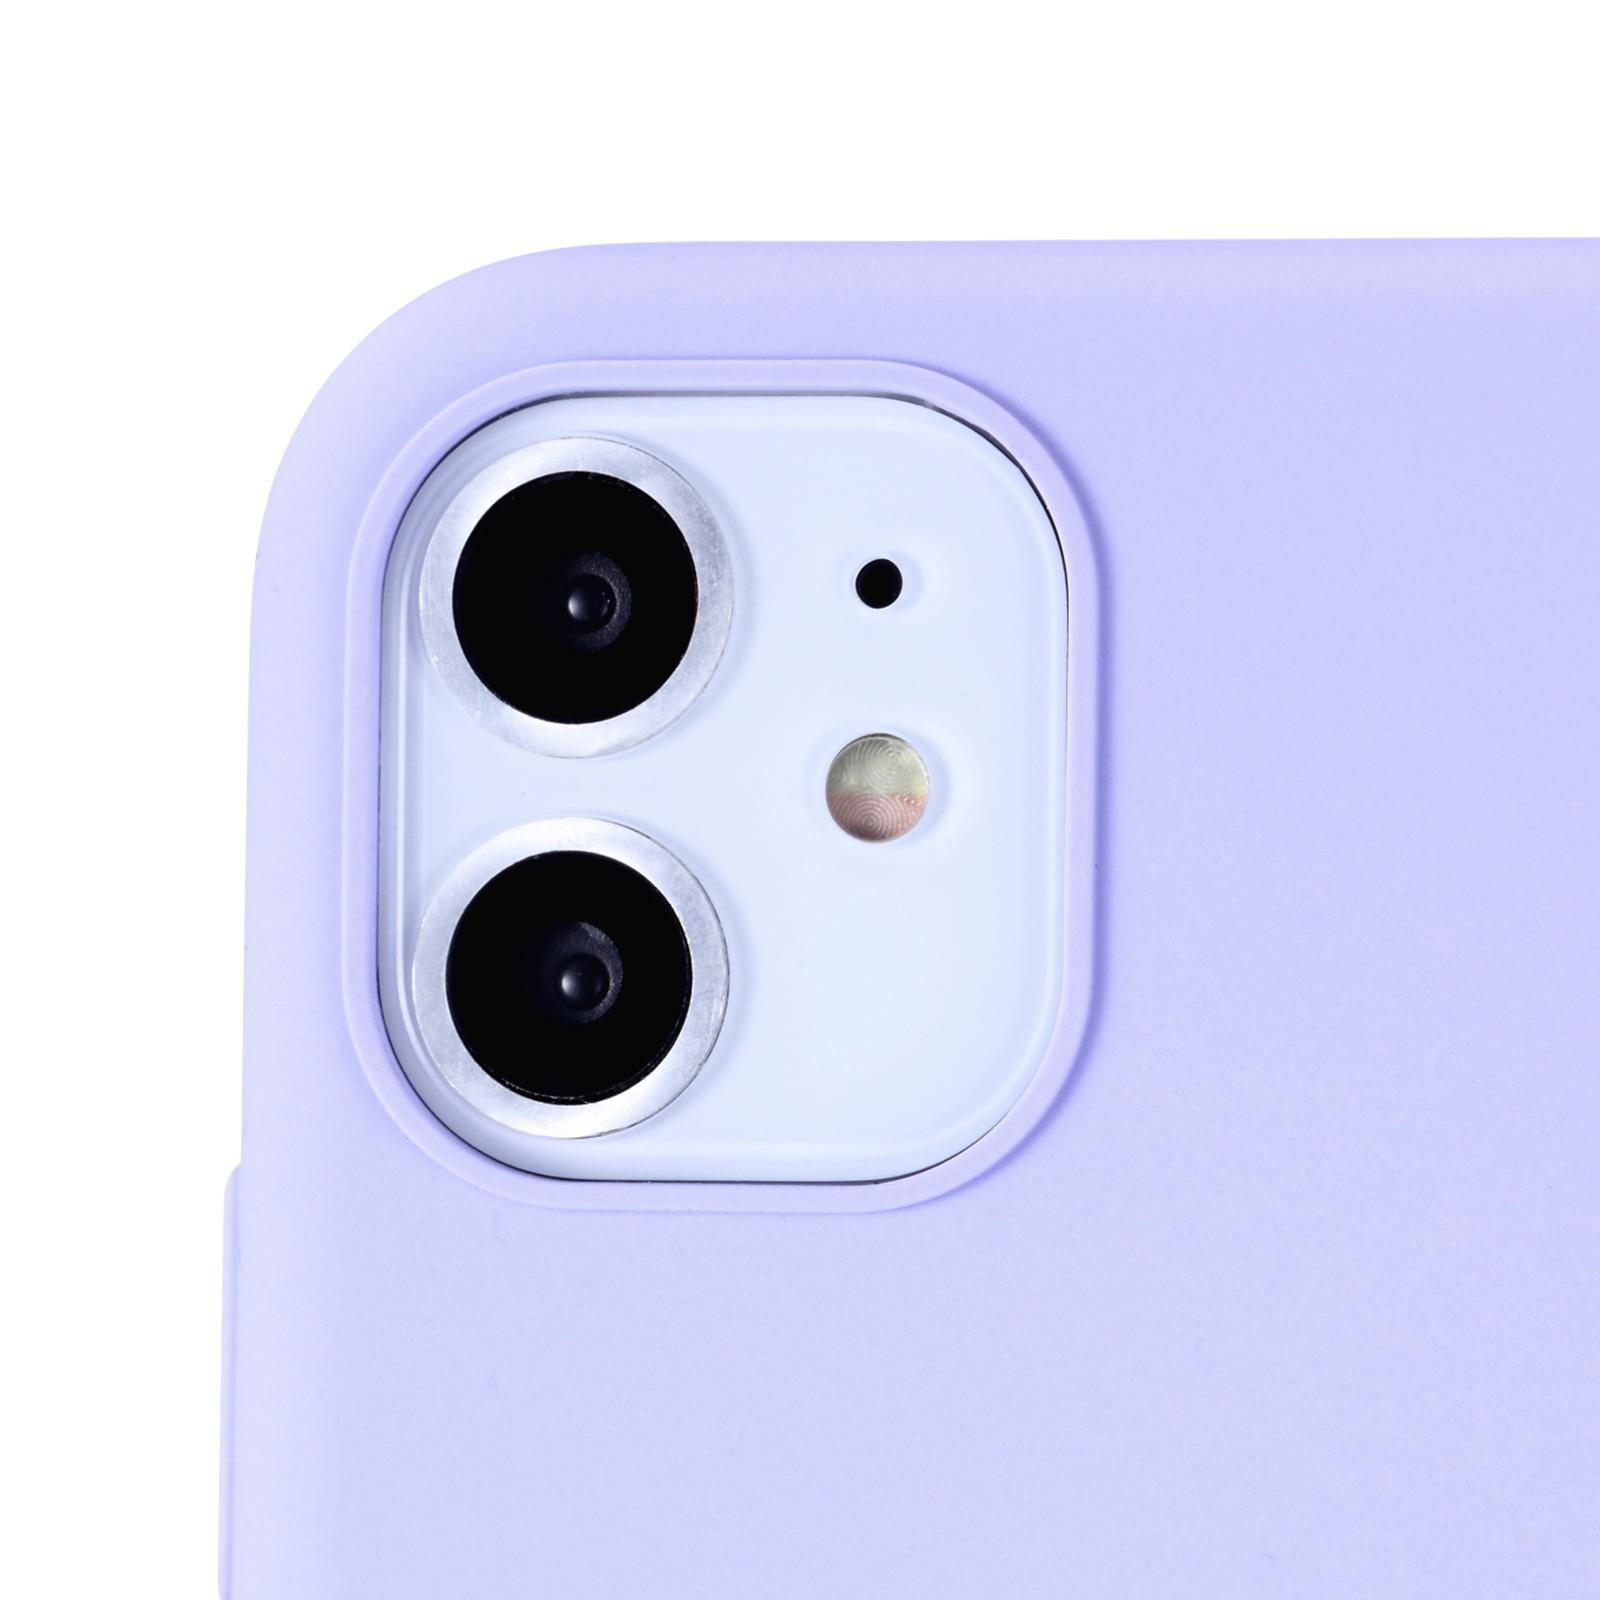 11 Bookcover, Silicone, Apple, Lavender HOLDIT iPhone XR,